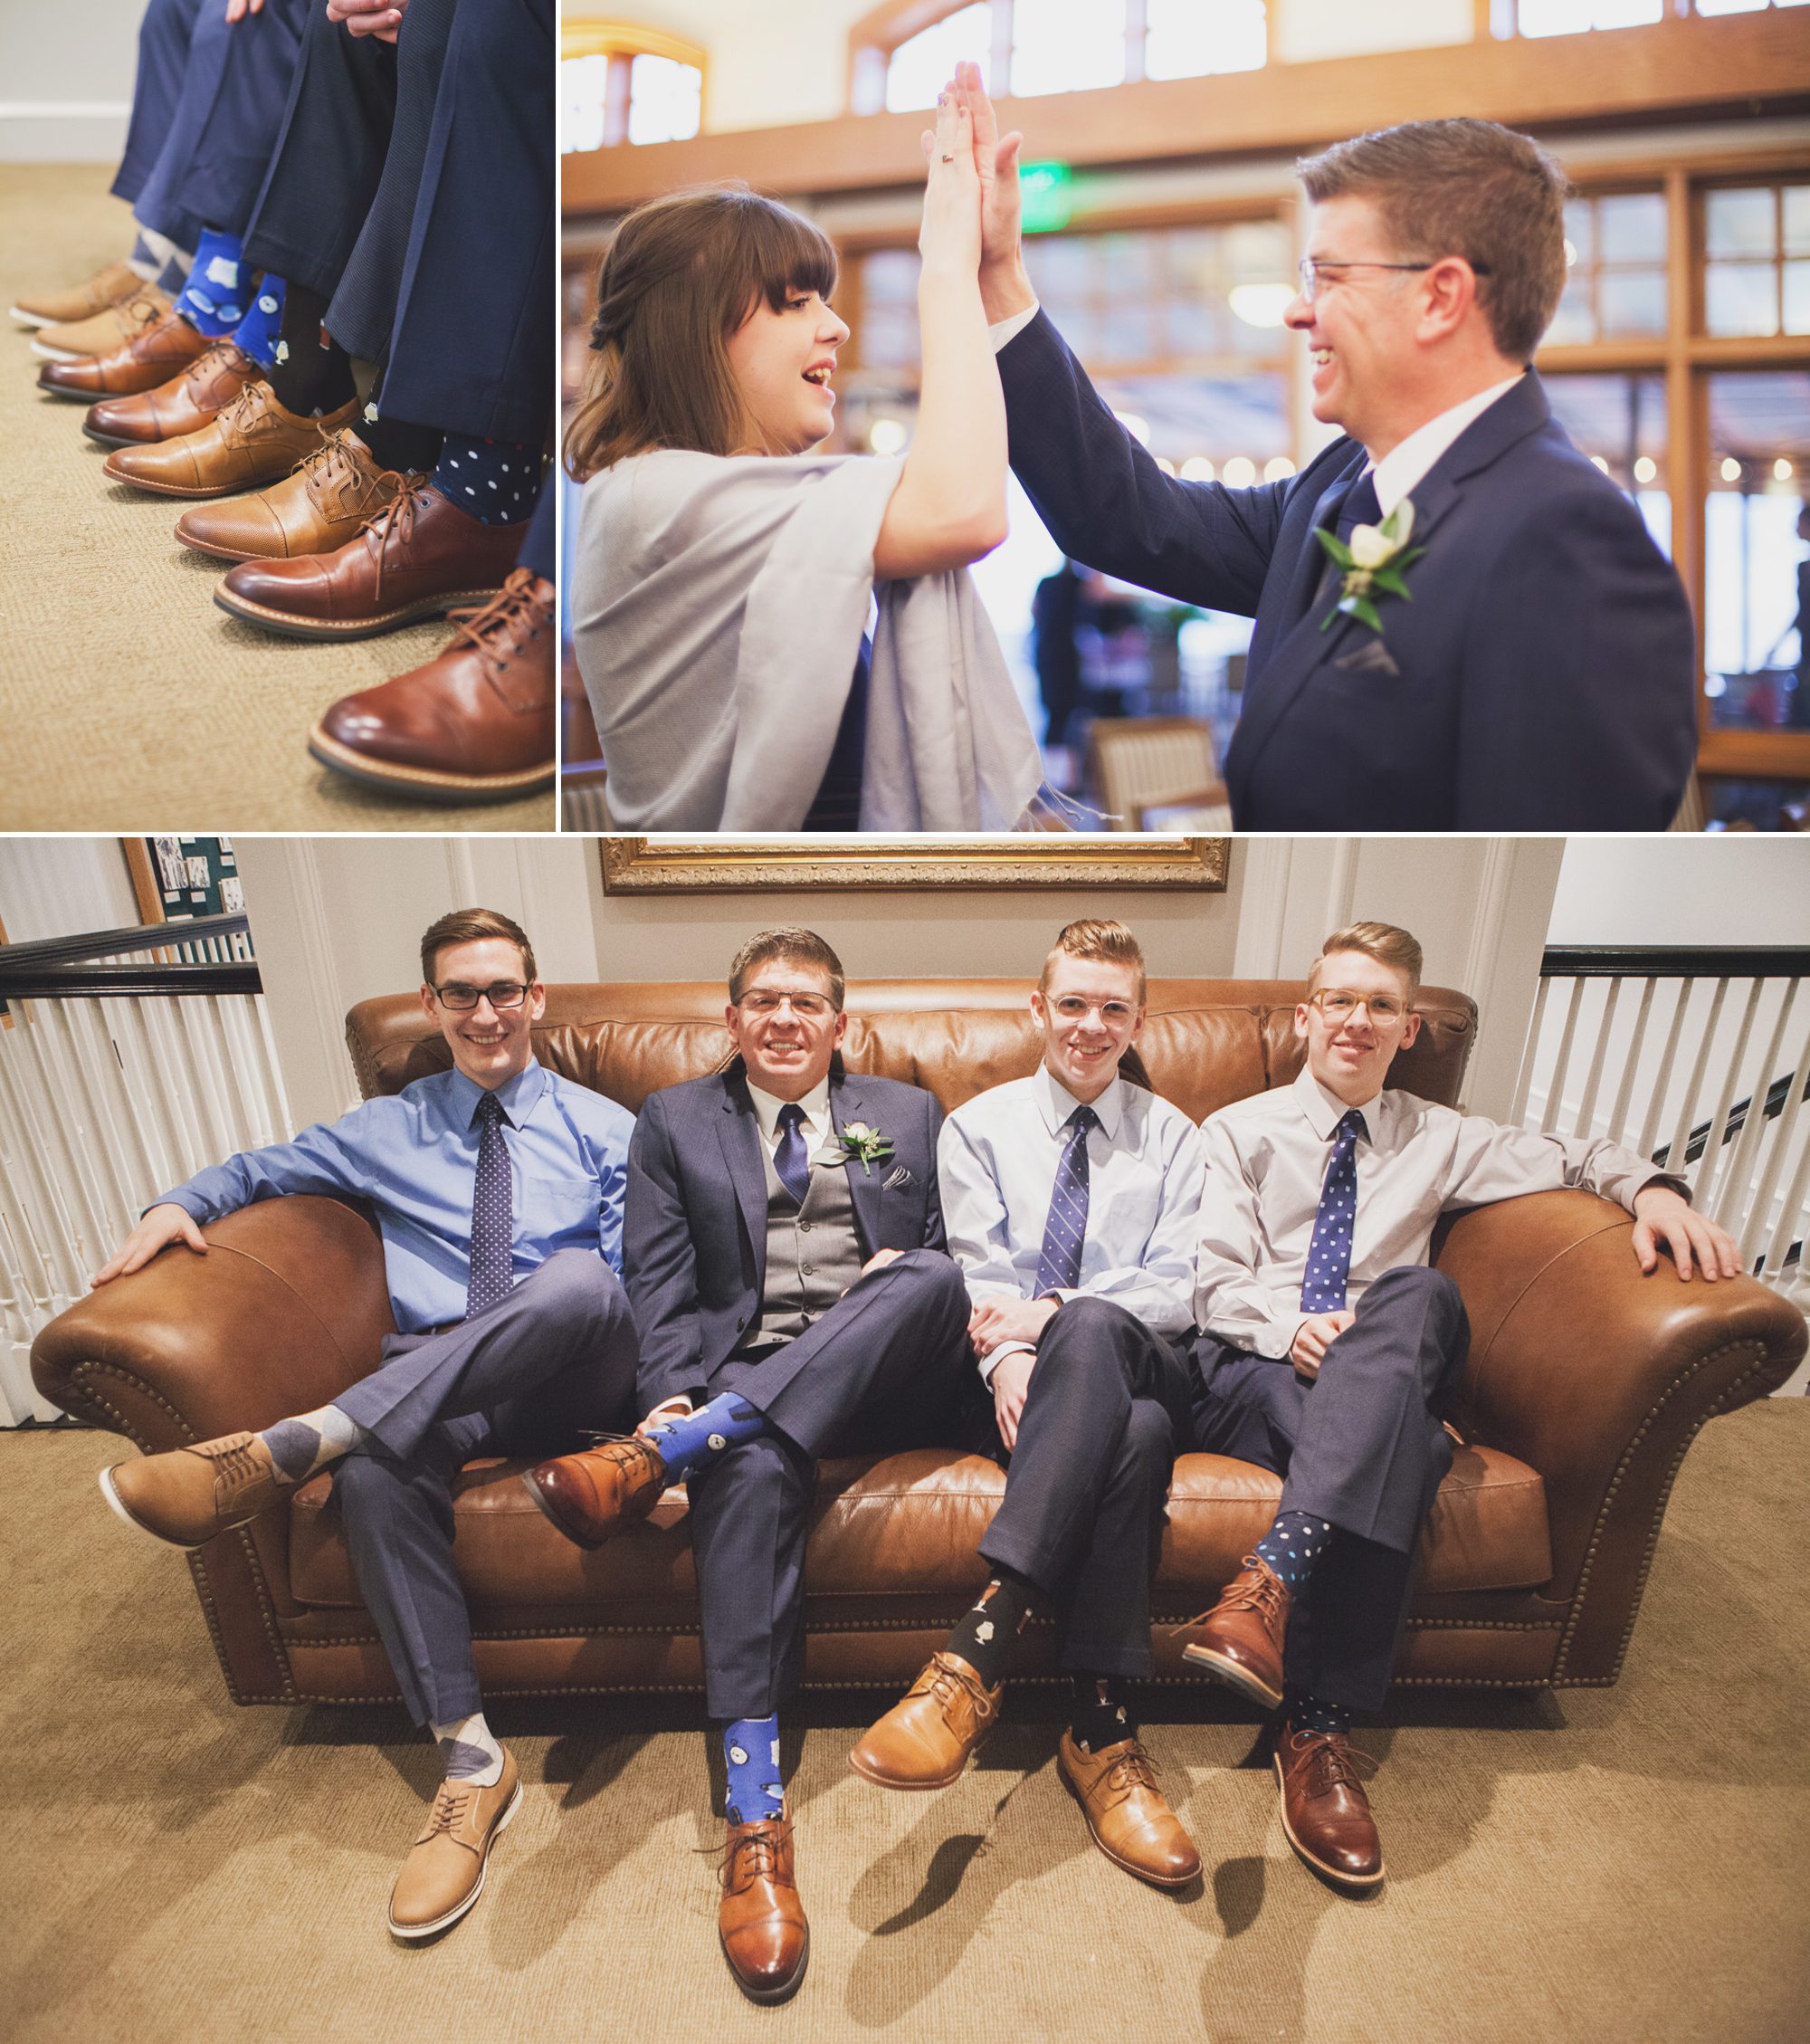 Groom getting ready before wedding ceremony. Winter wedding at Vanderbilt Legends Golf Course in Brentwood TN, photos by Krista Lee Photography